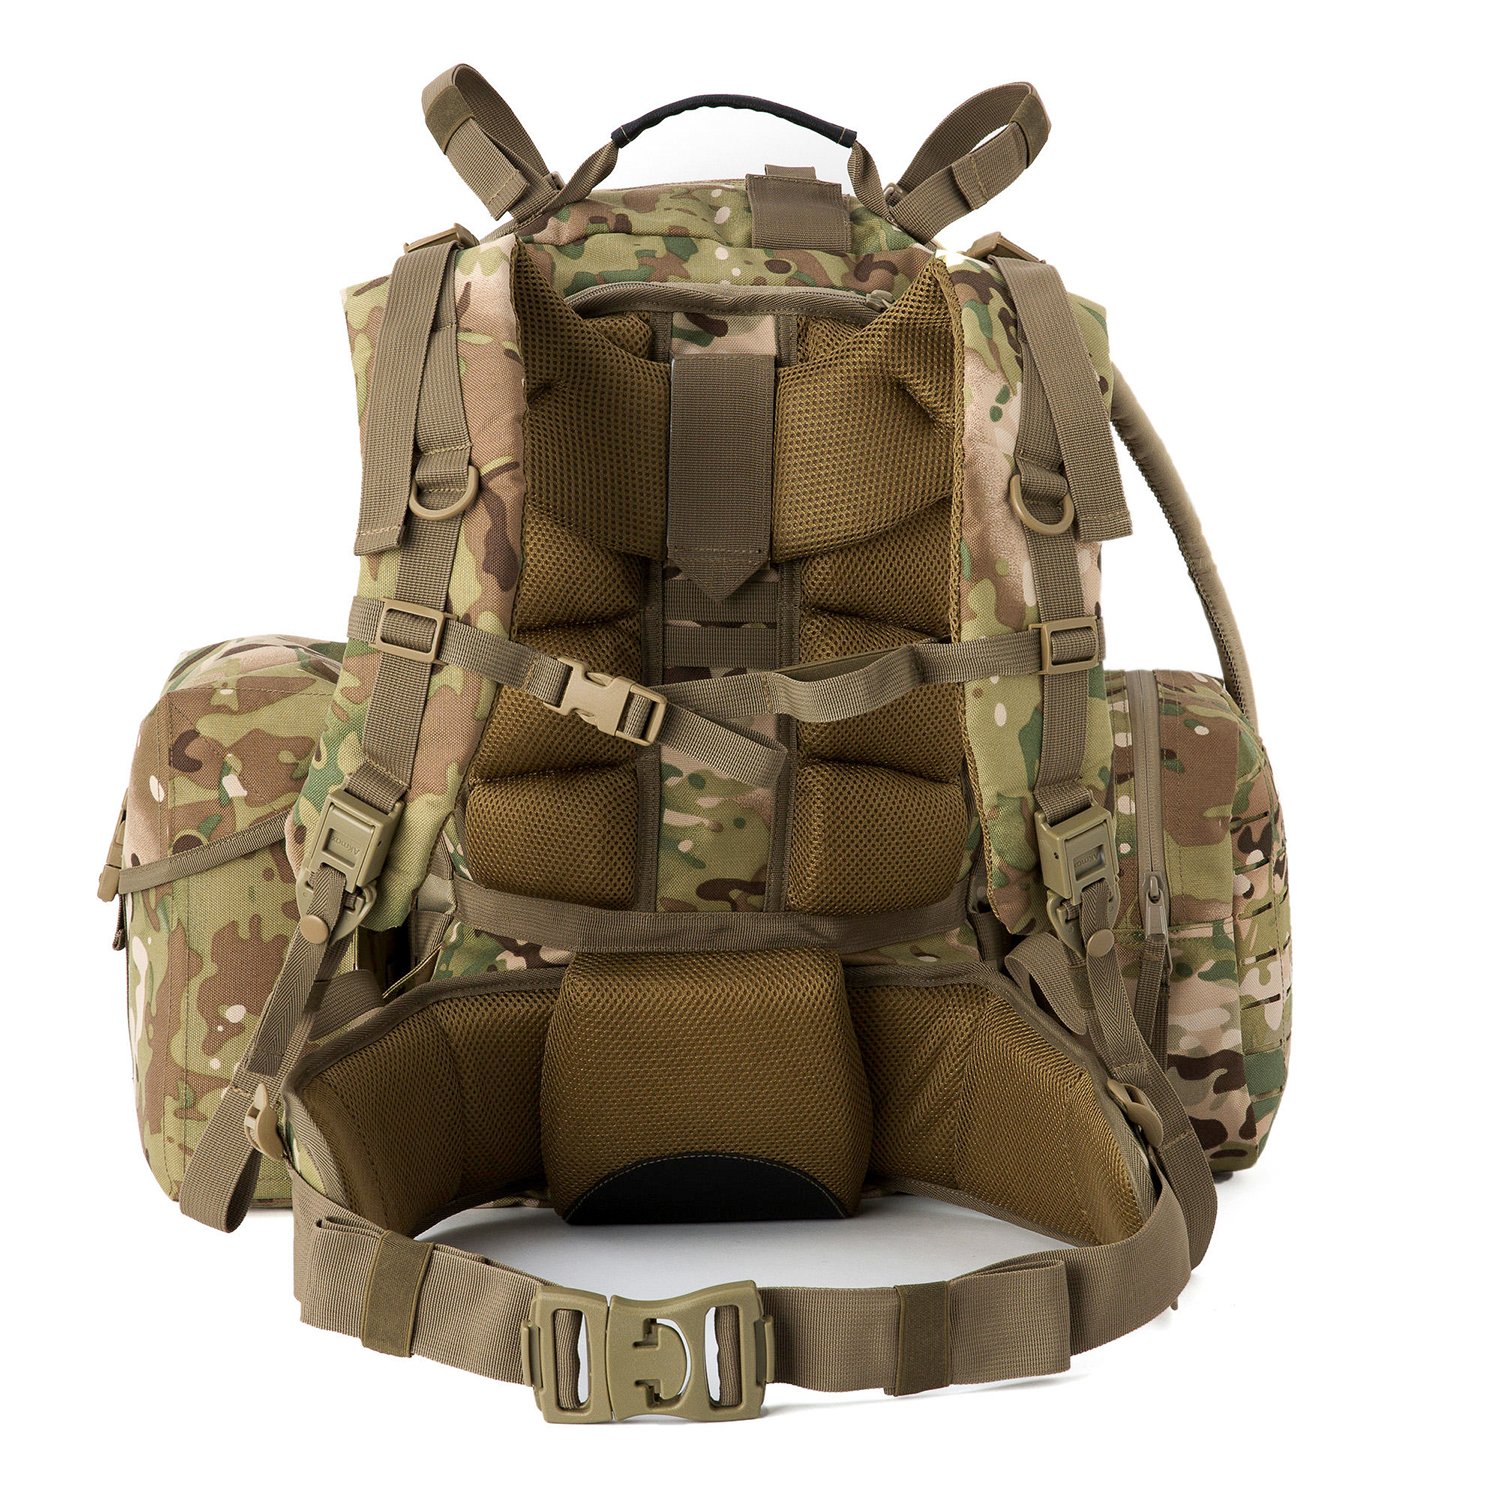 MOLLE Laser Cutting Assault Backpack Hydration Pack Multicam Camouflage